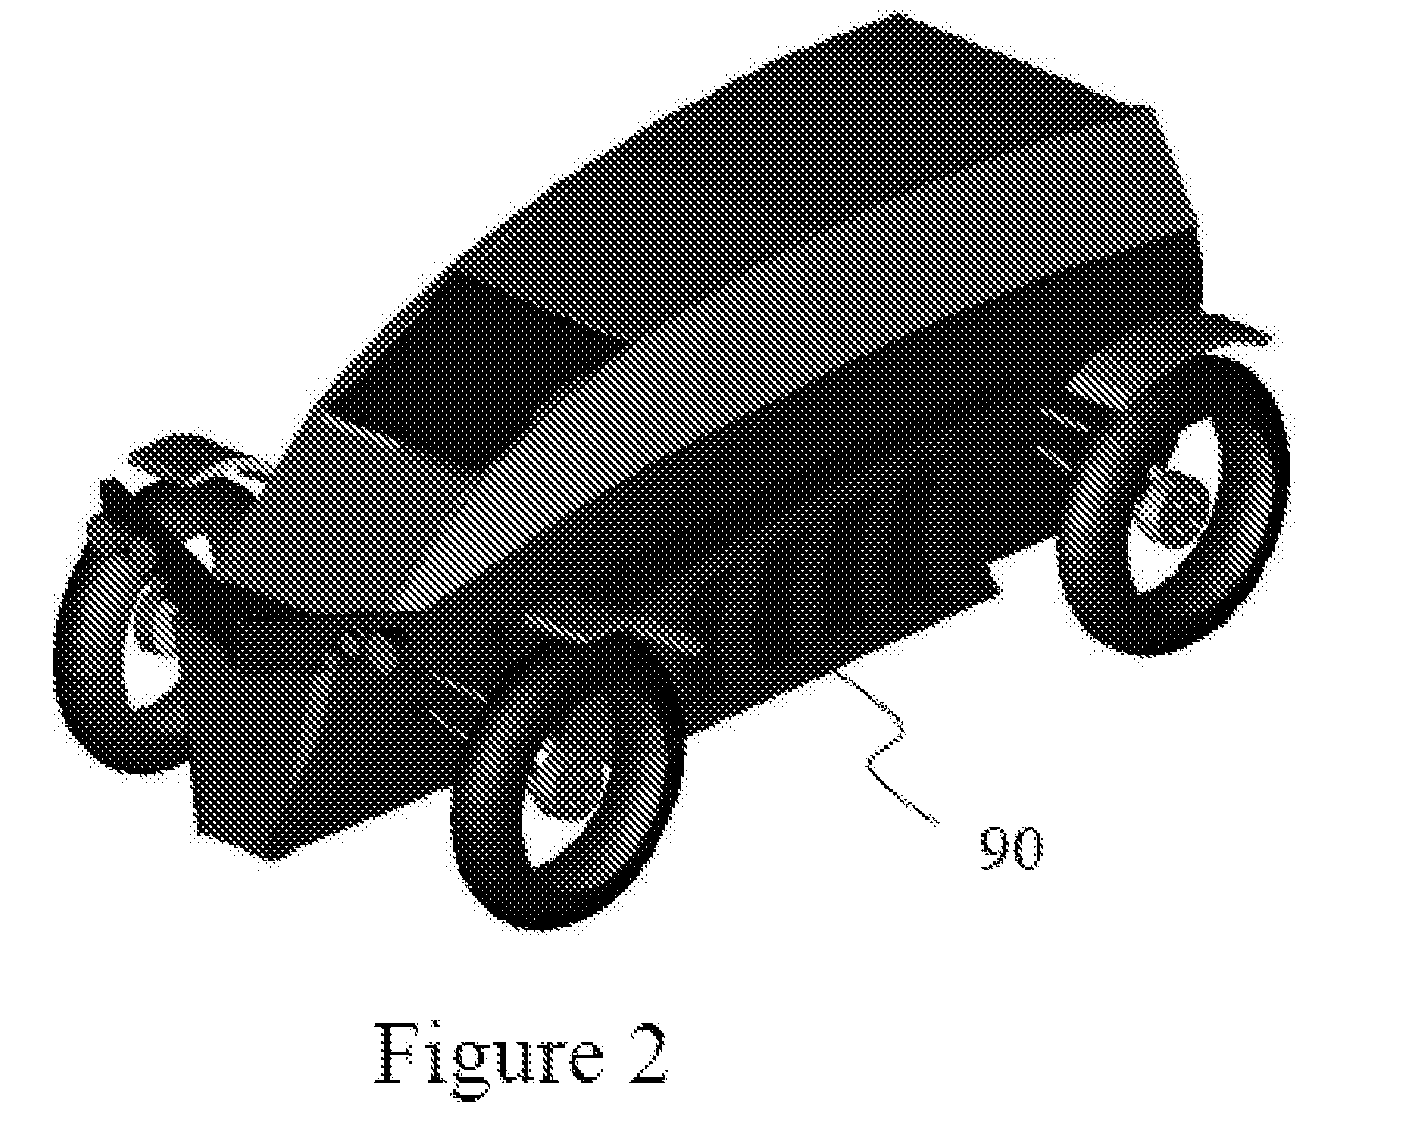 Safe, Super-efficient, Four-wheeled Vehicle Employing Large Diameter Wheels with Continuous-Radius Tires, with Leaning Option